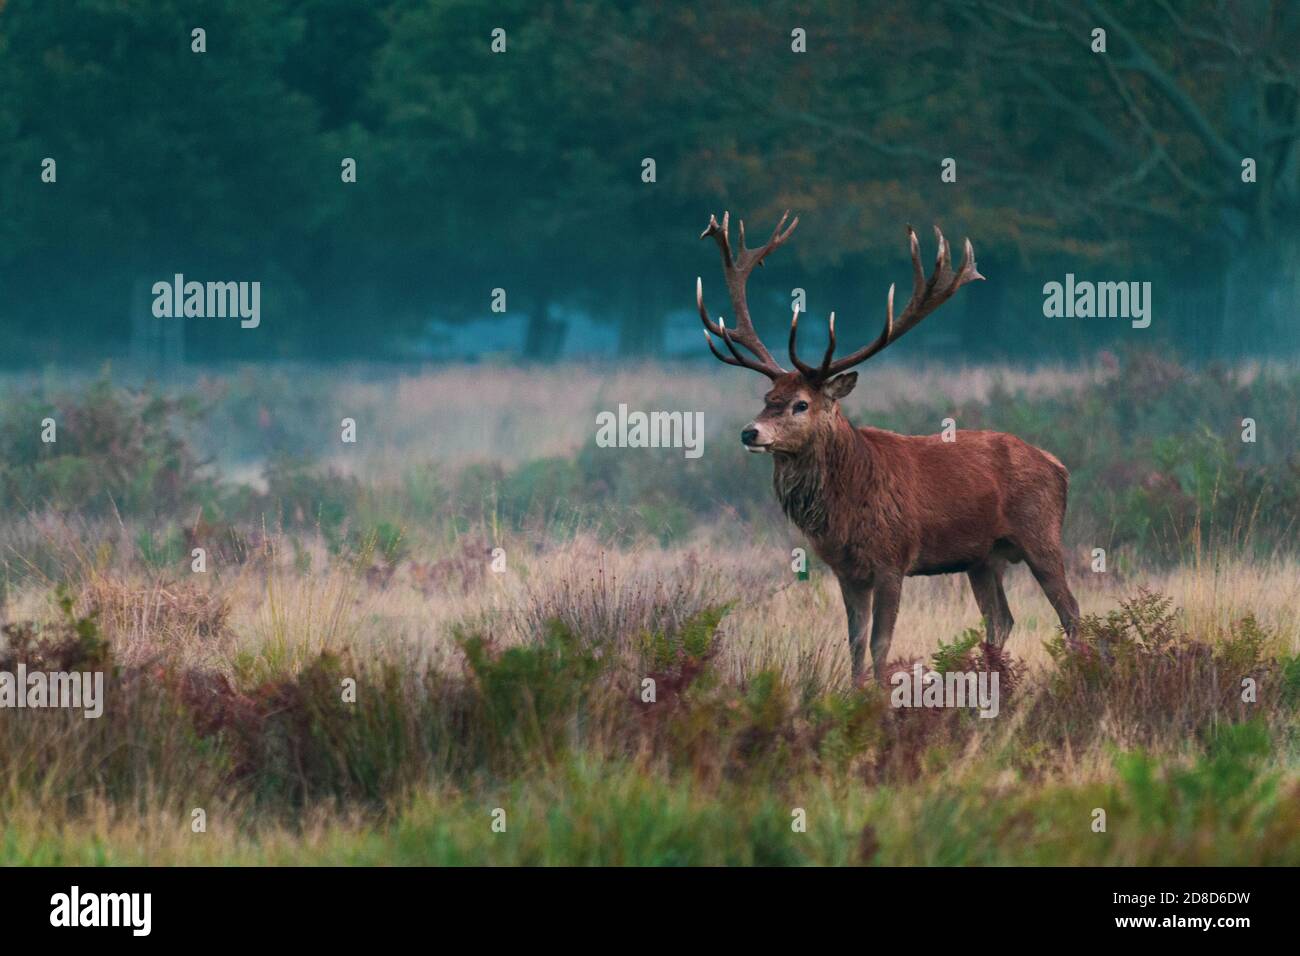 Adult deer with beautiful antlers with copy space Stock Photo